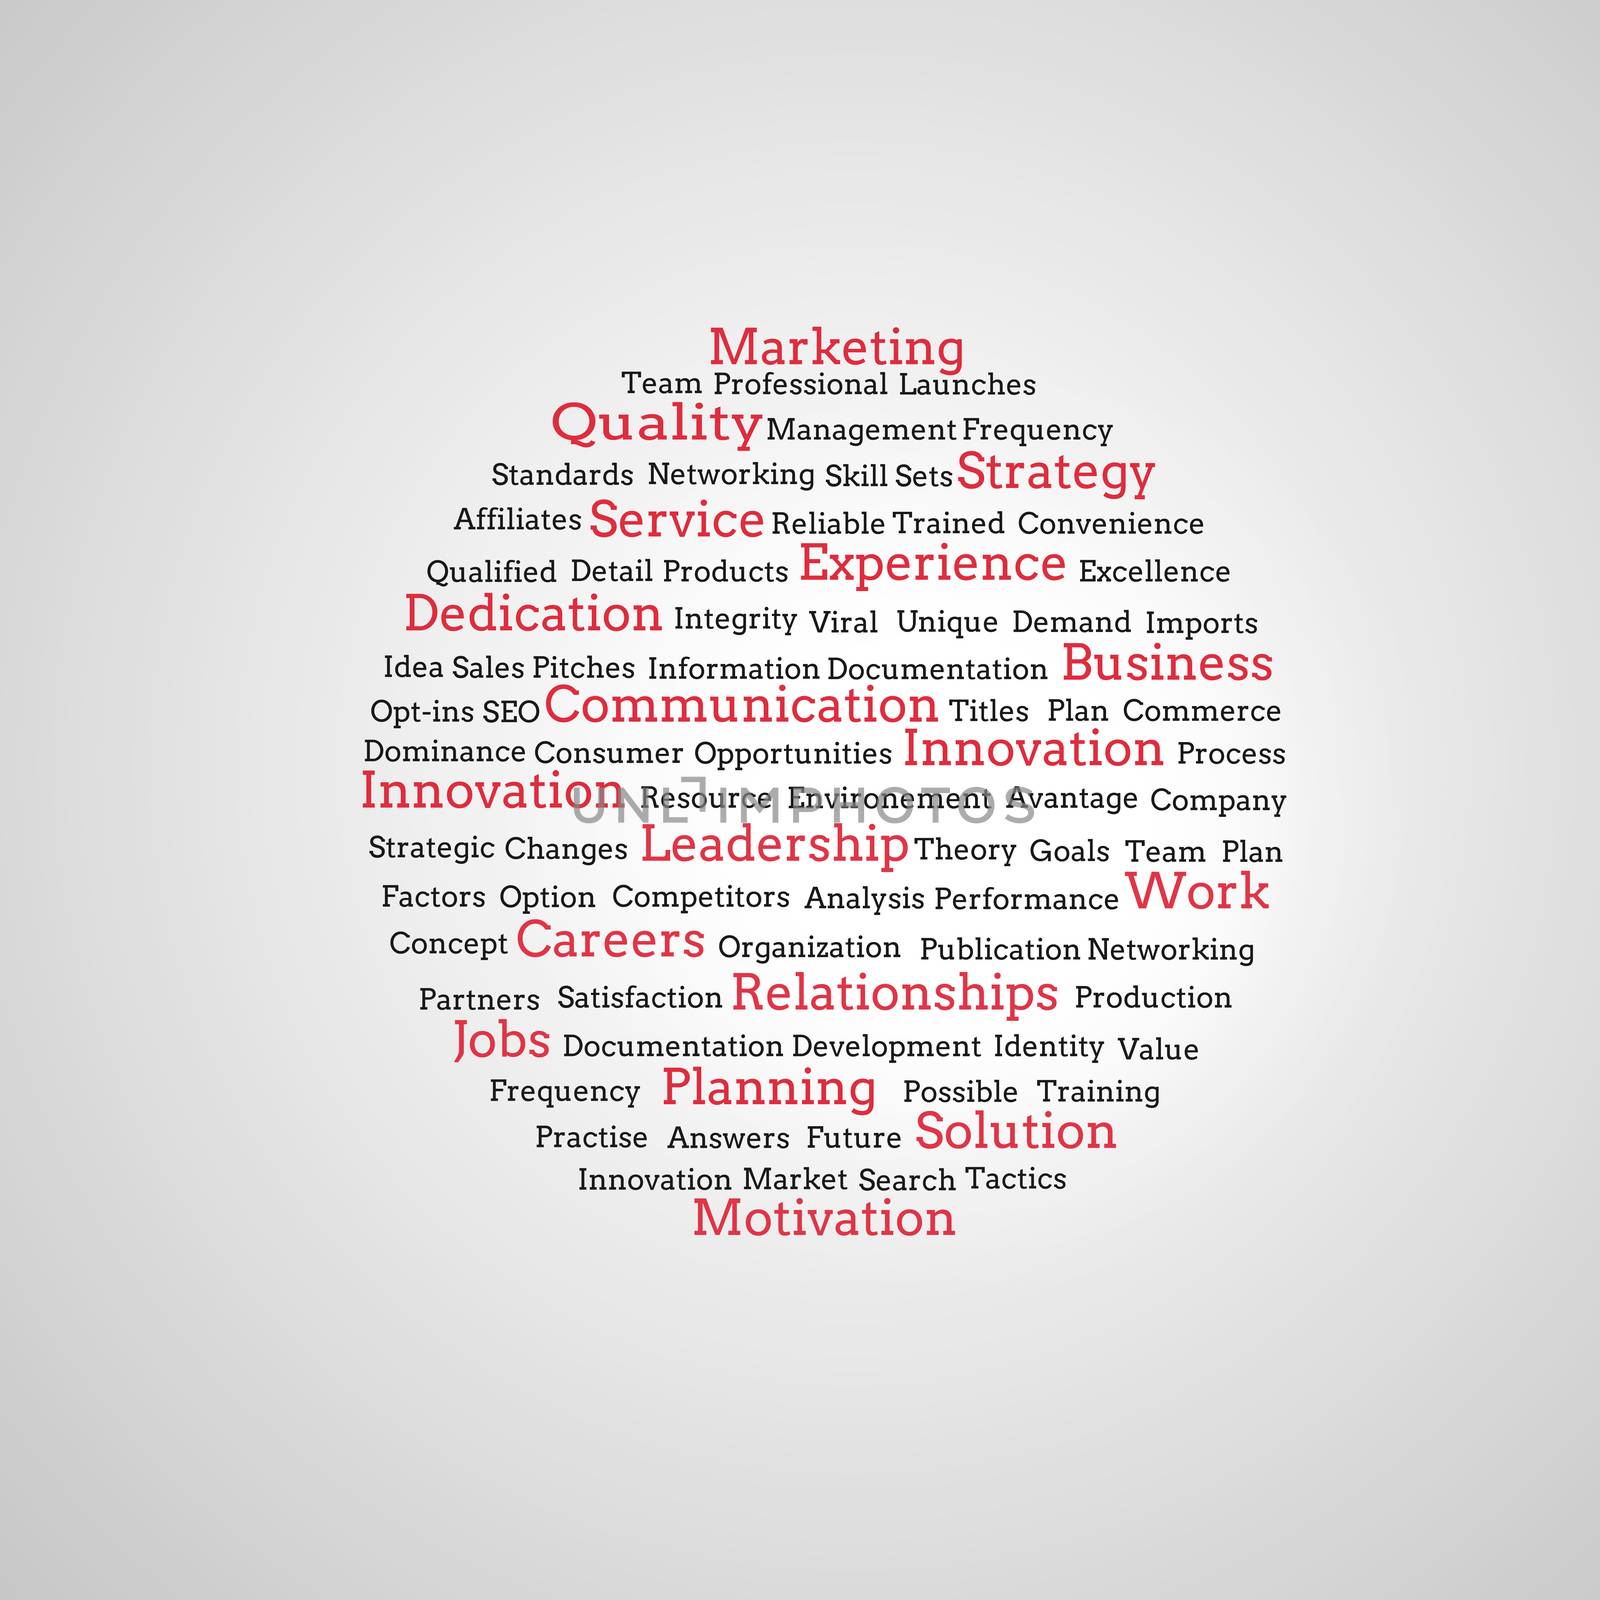 Group of red marketing terms on grey background